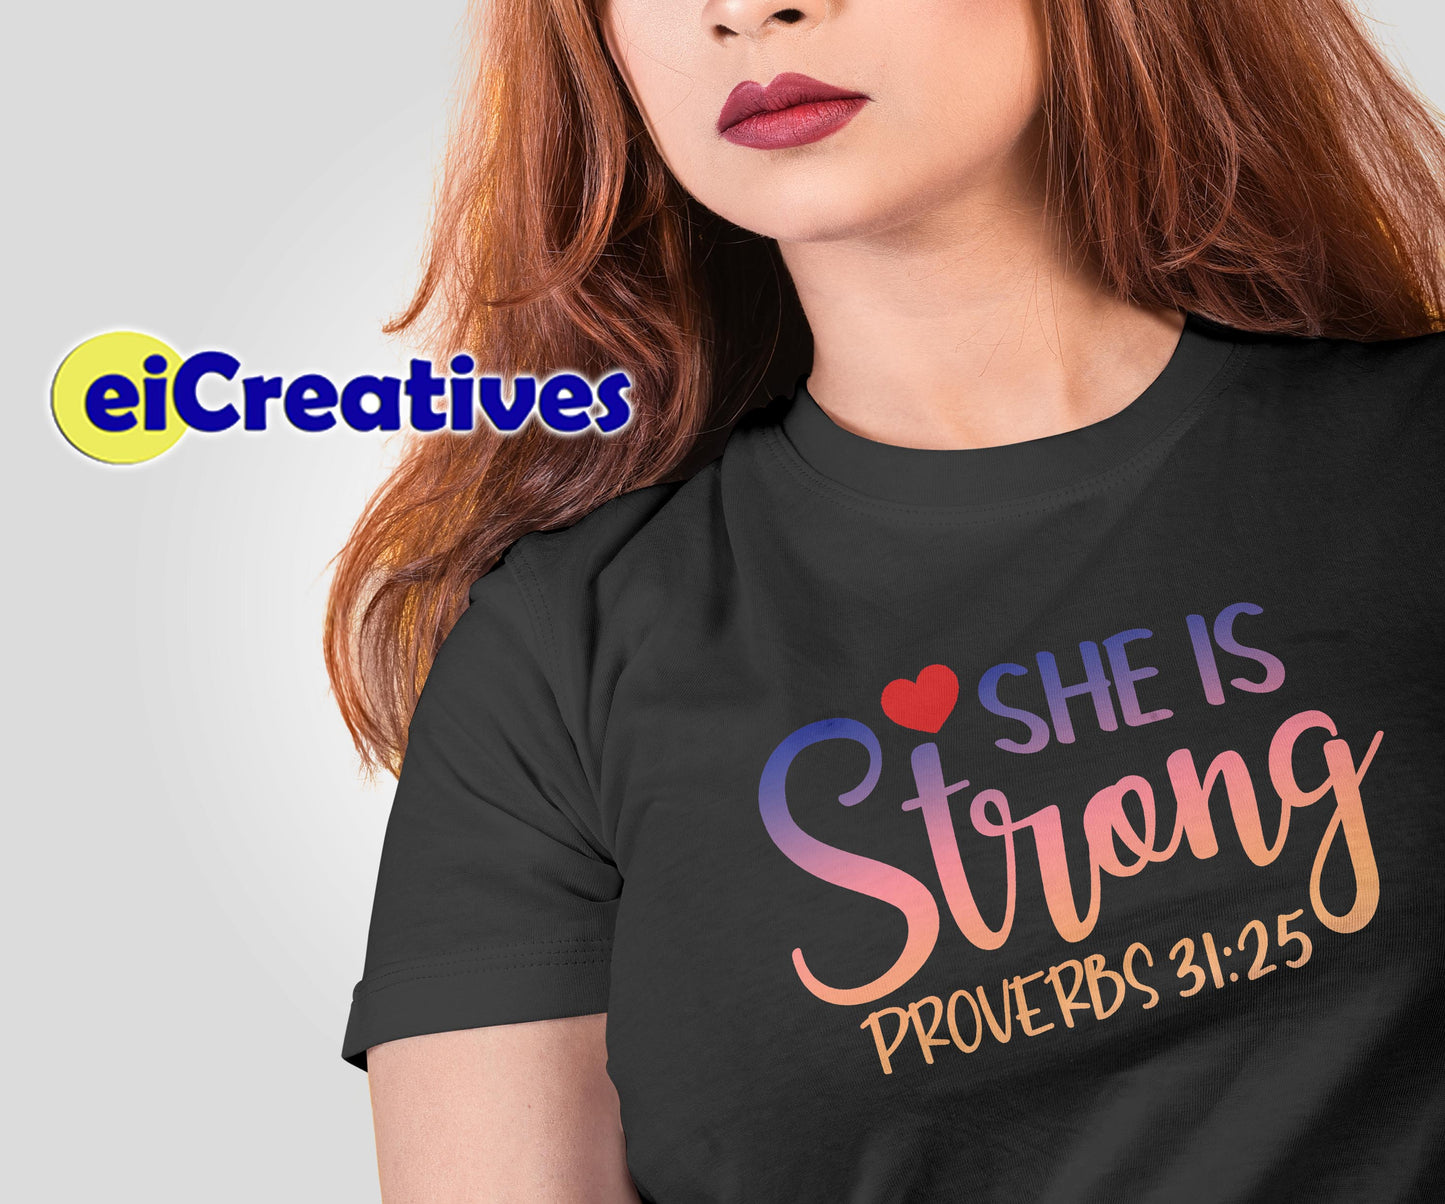 She is Strong - Tshirt